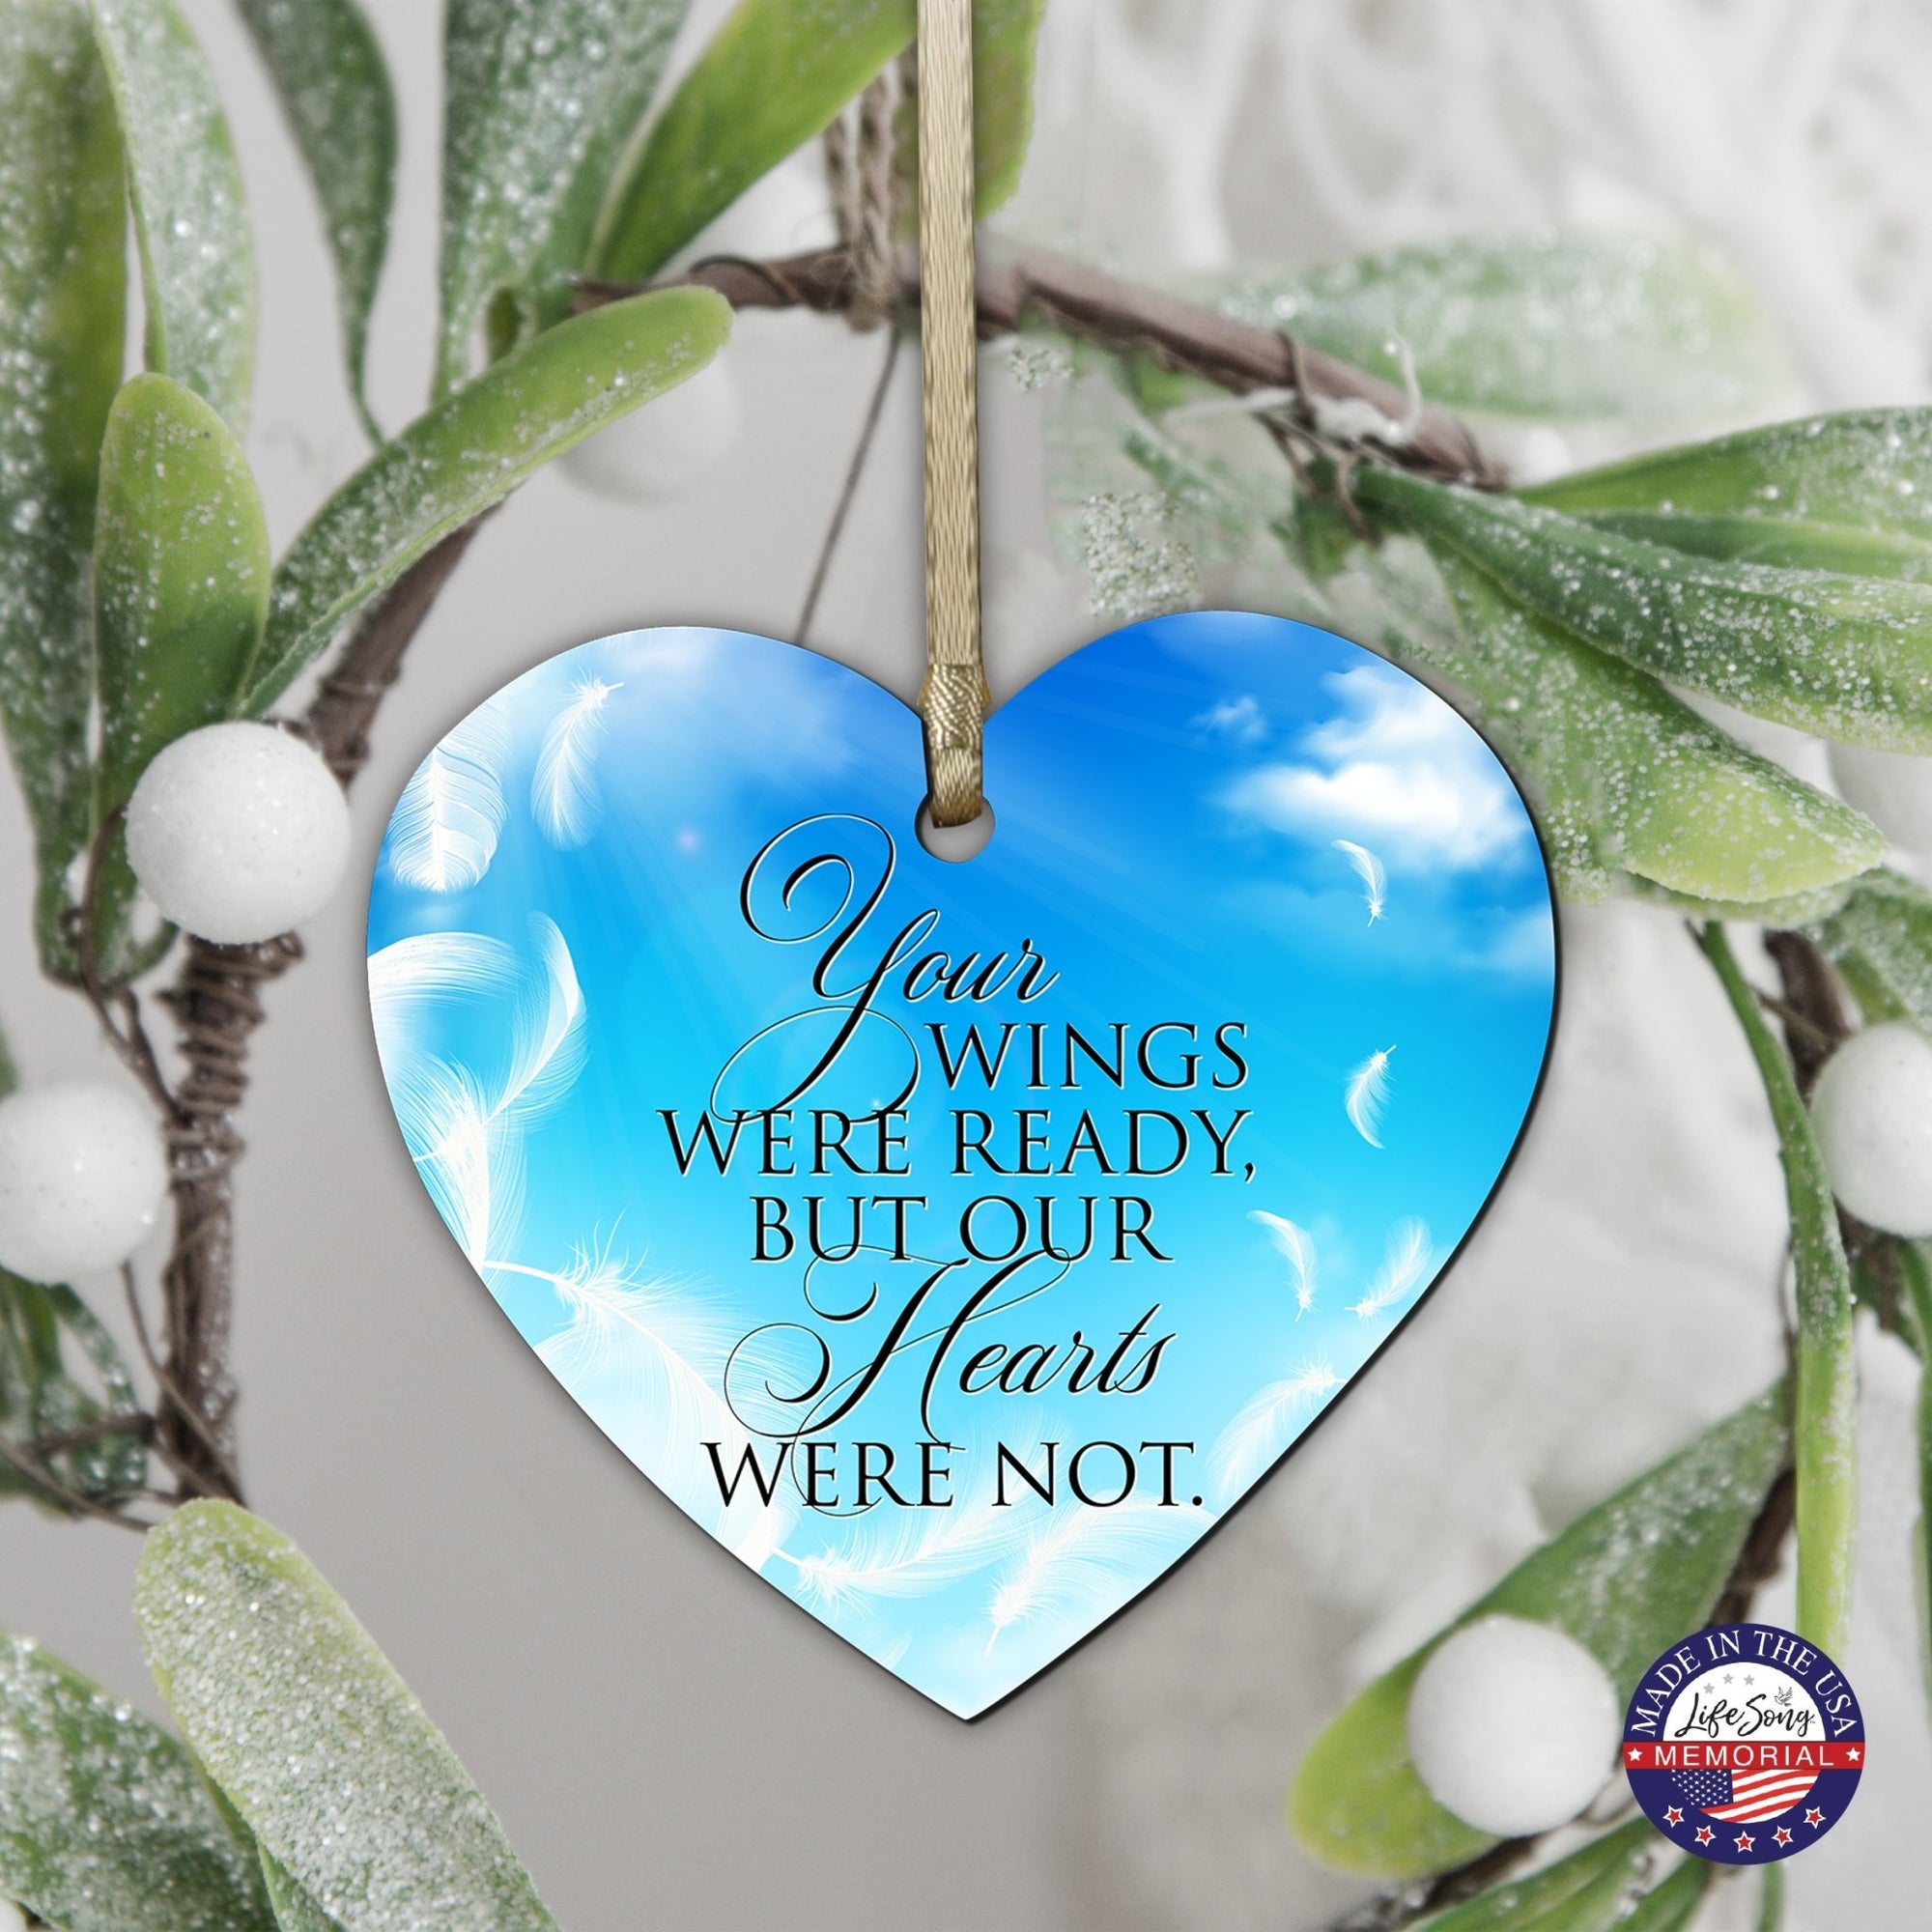 Memorial Hanging Heart Ornament for Loss of Loved One - LifeSong Milestones